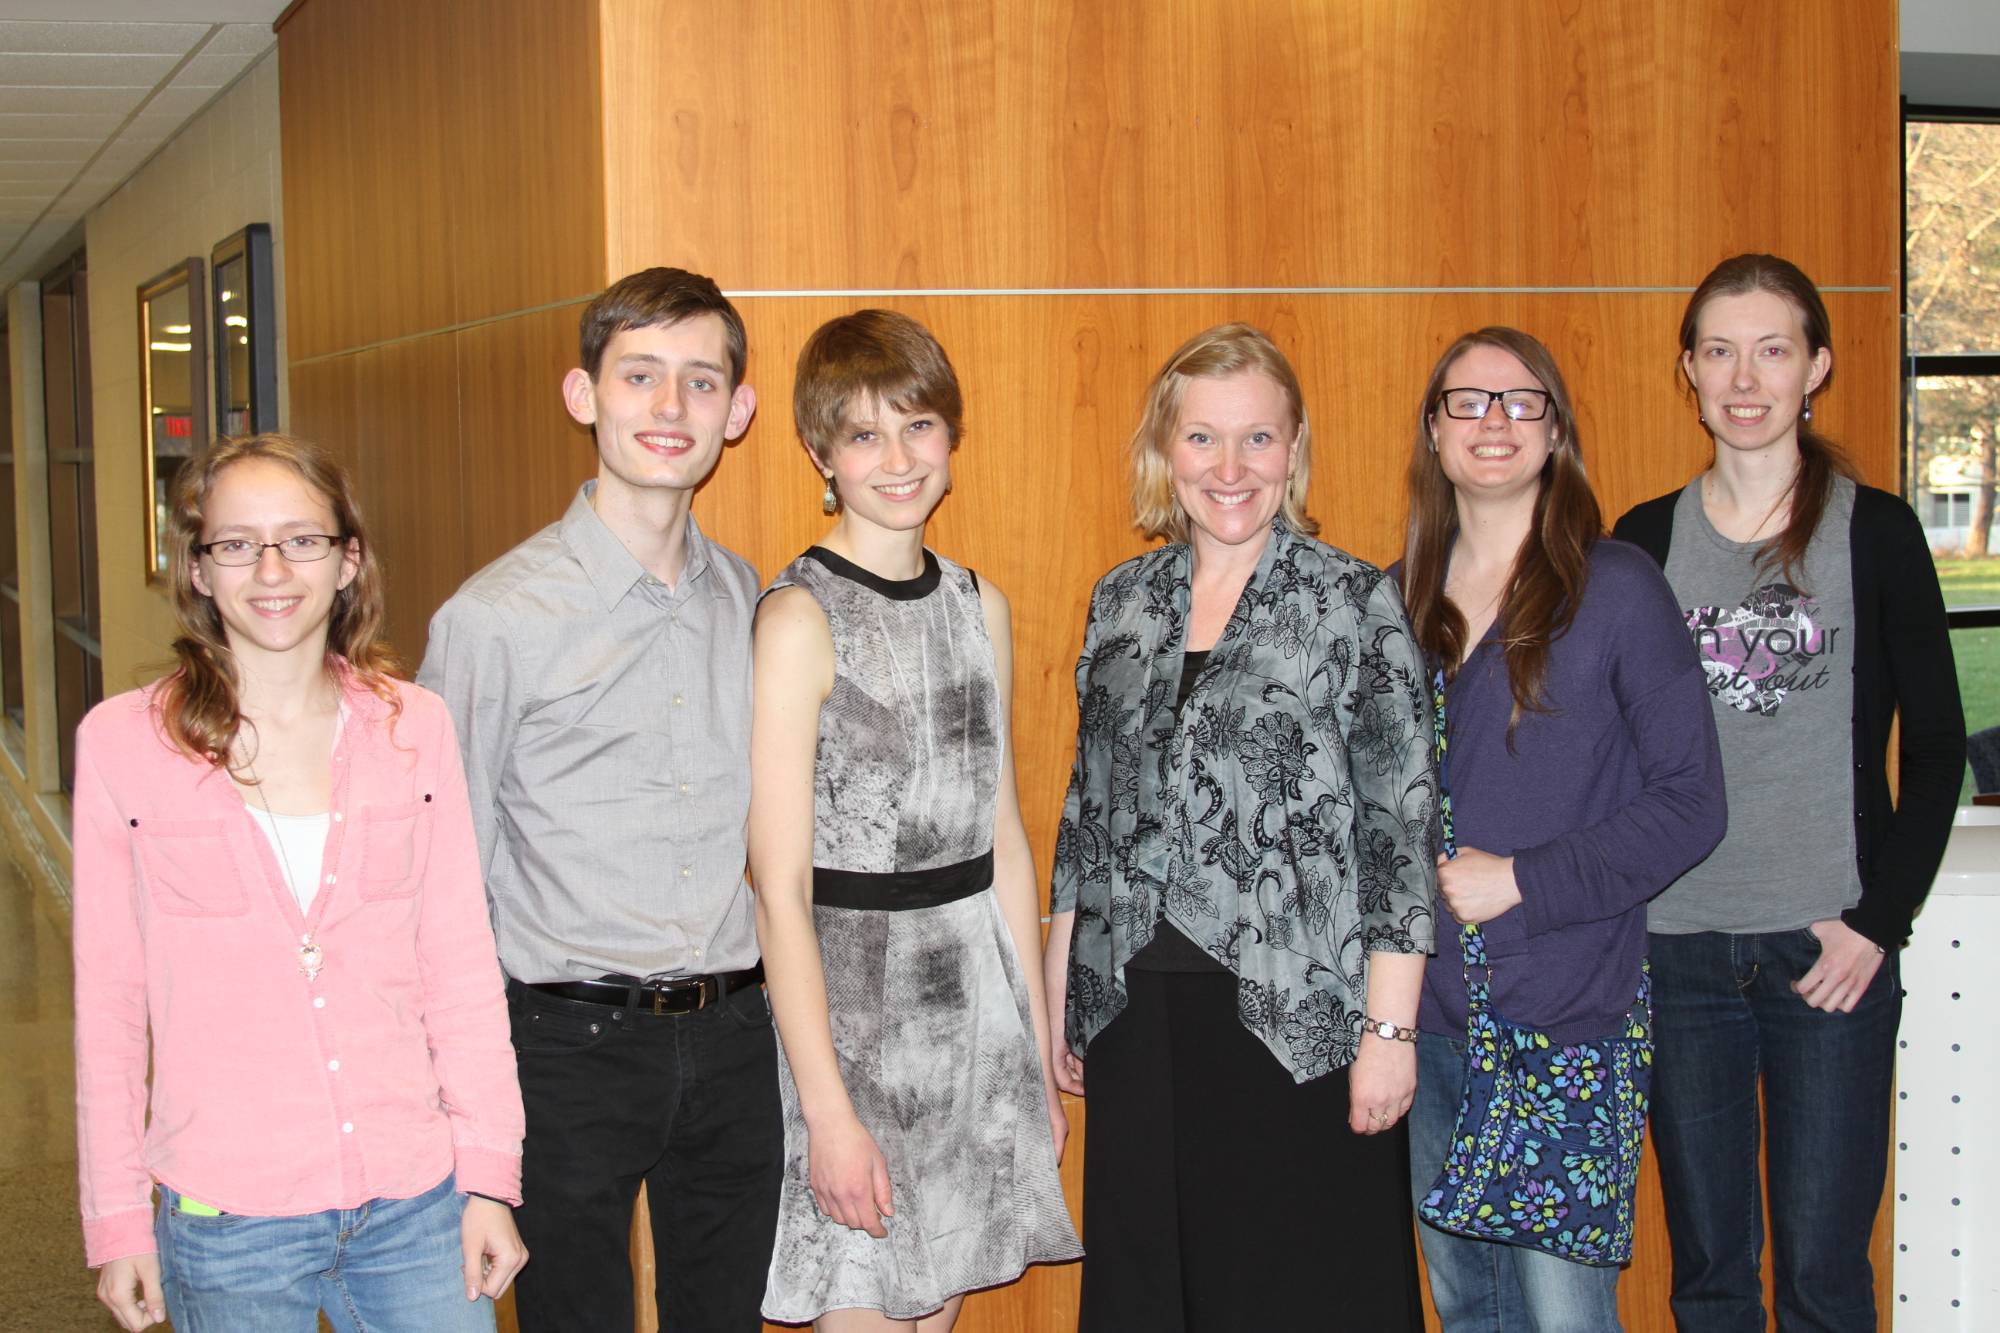 GVSU oboists in the Performing Arts Center after Richie Arndorfer's degree recital